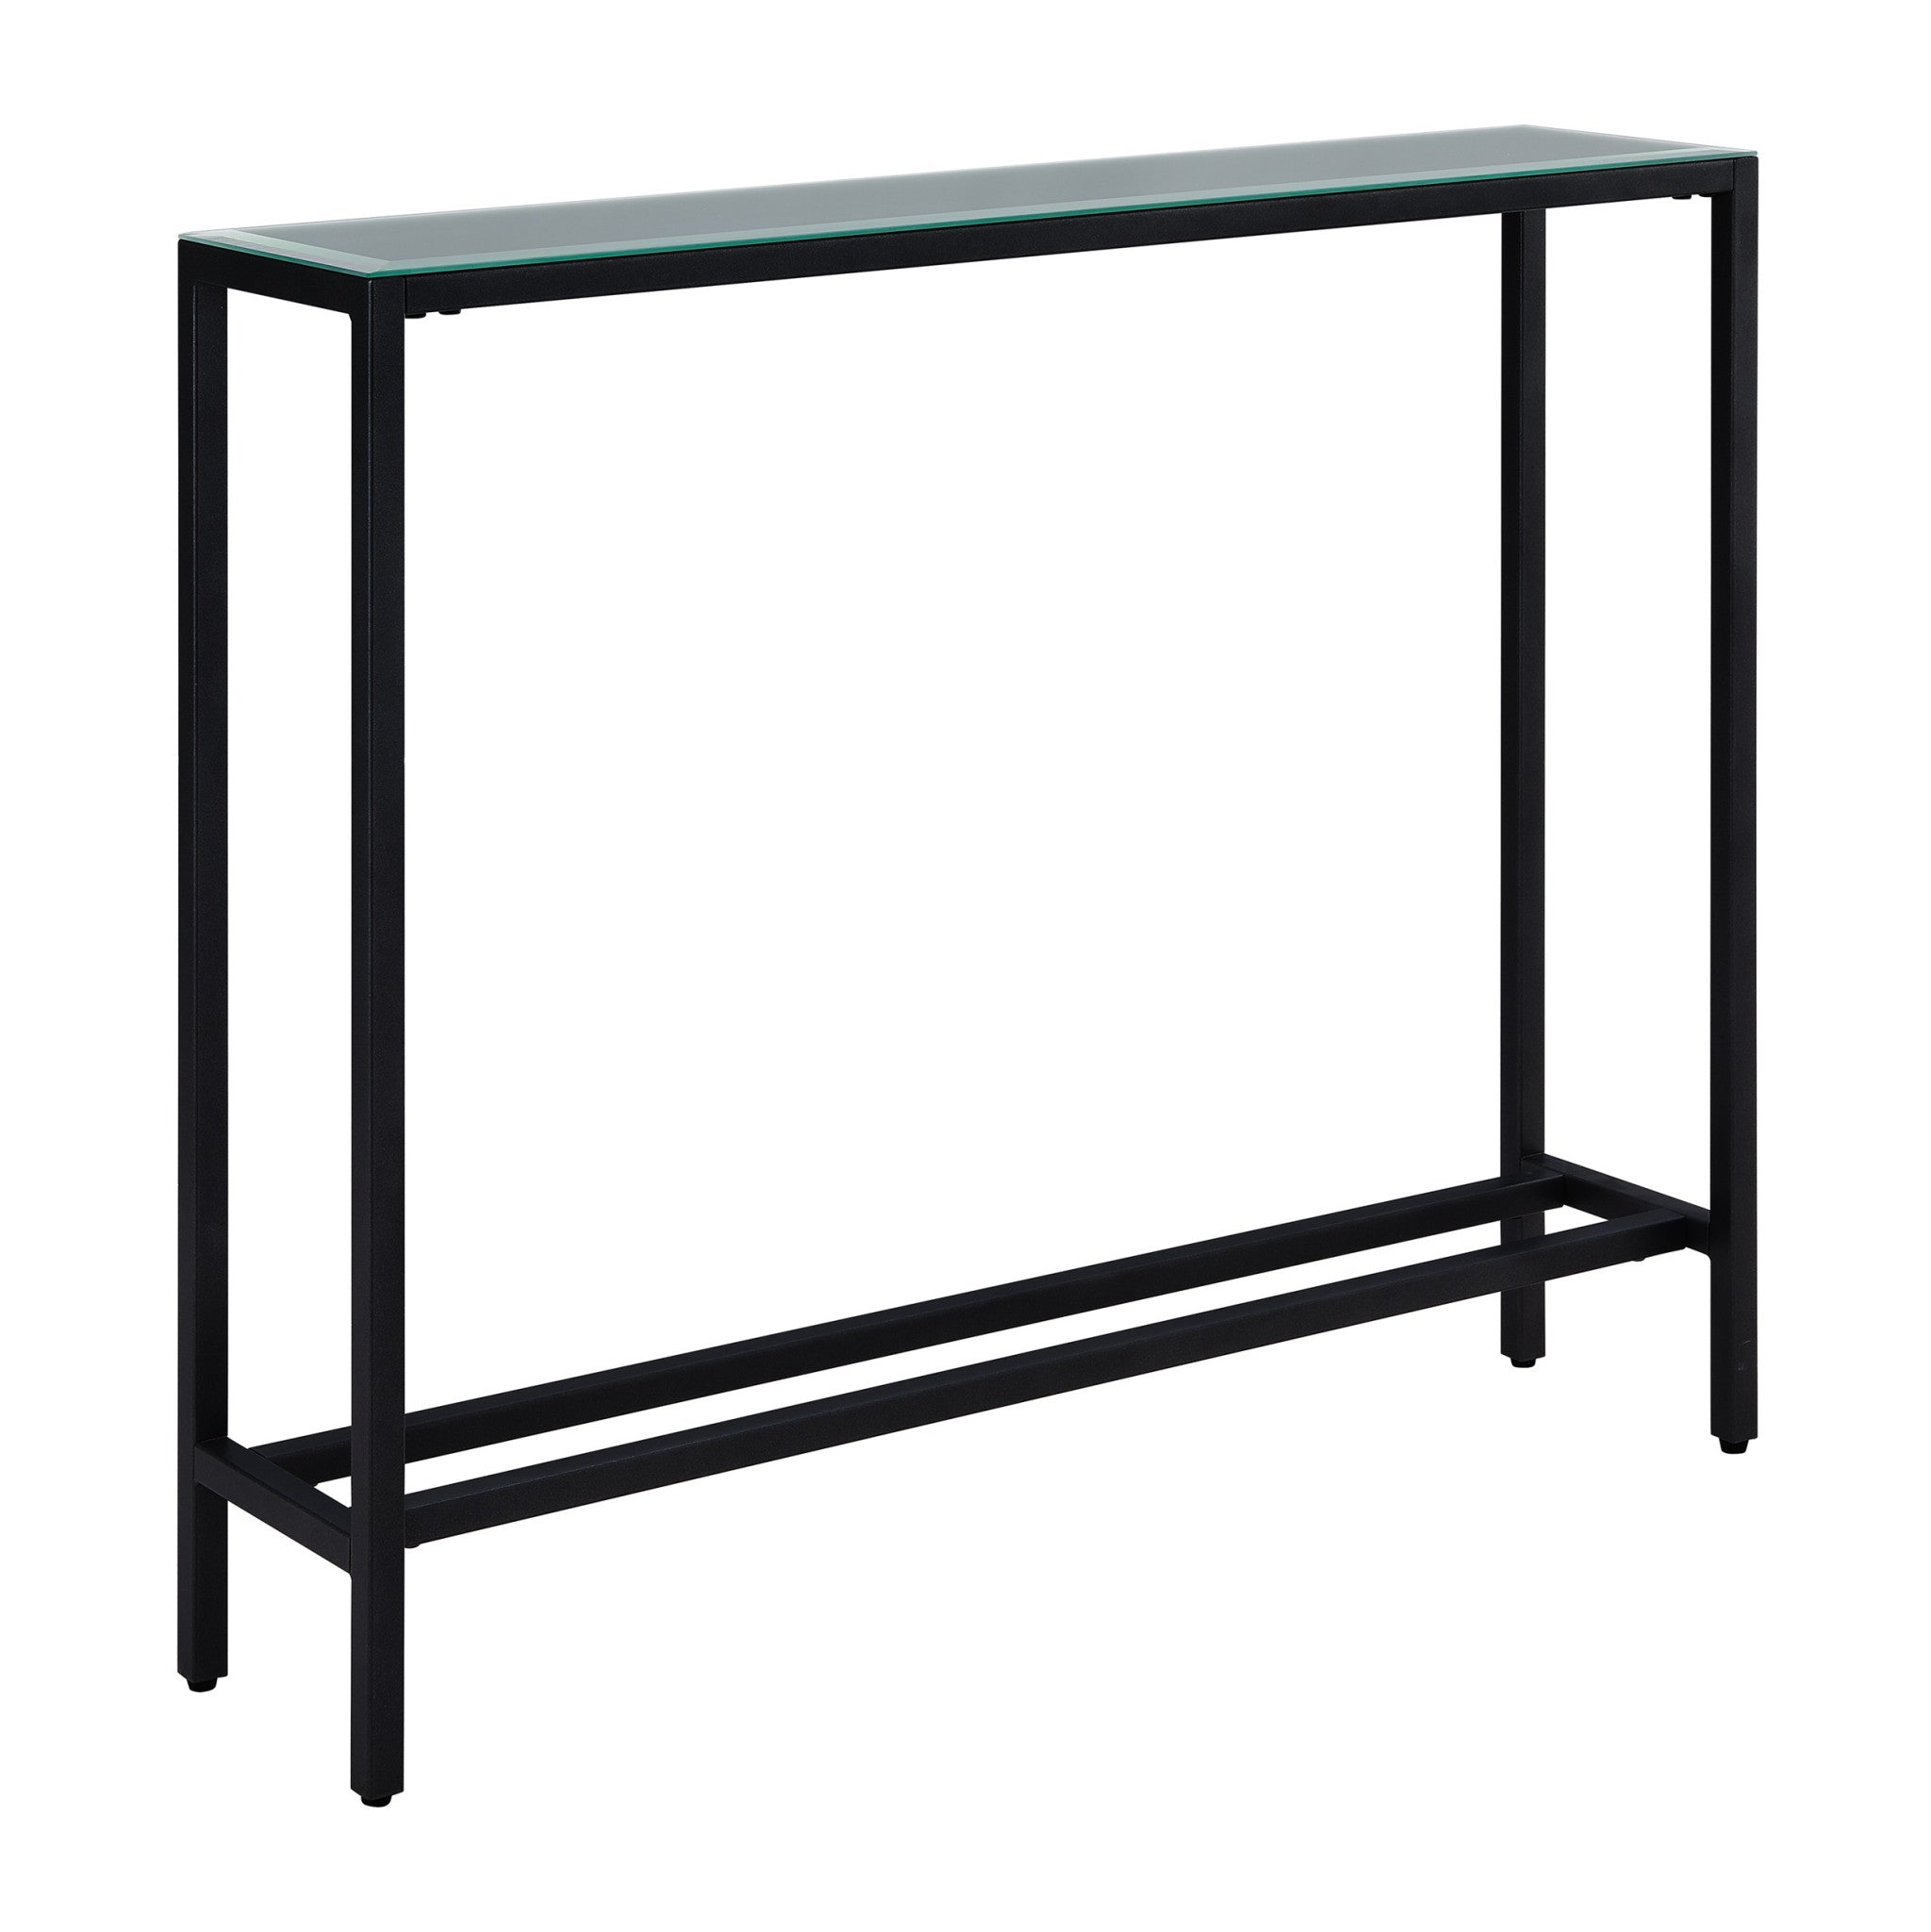 36" Black Mirrored Glass Console Table